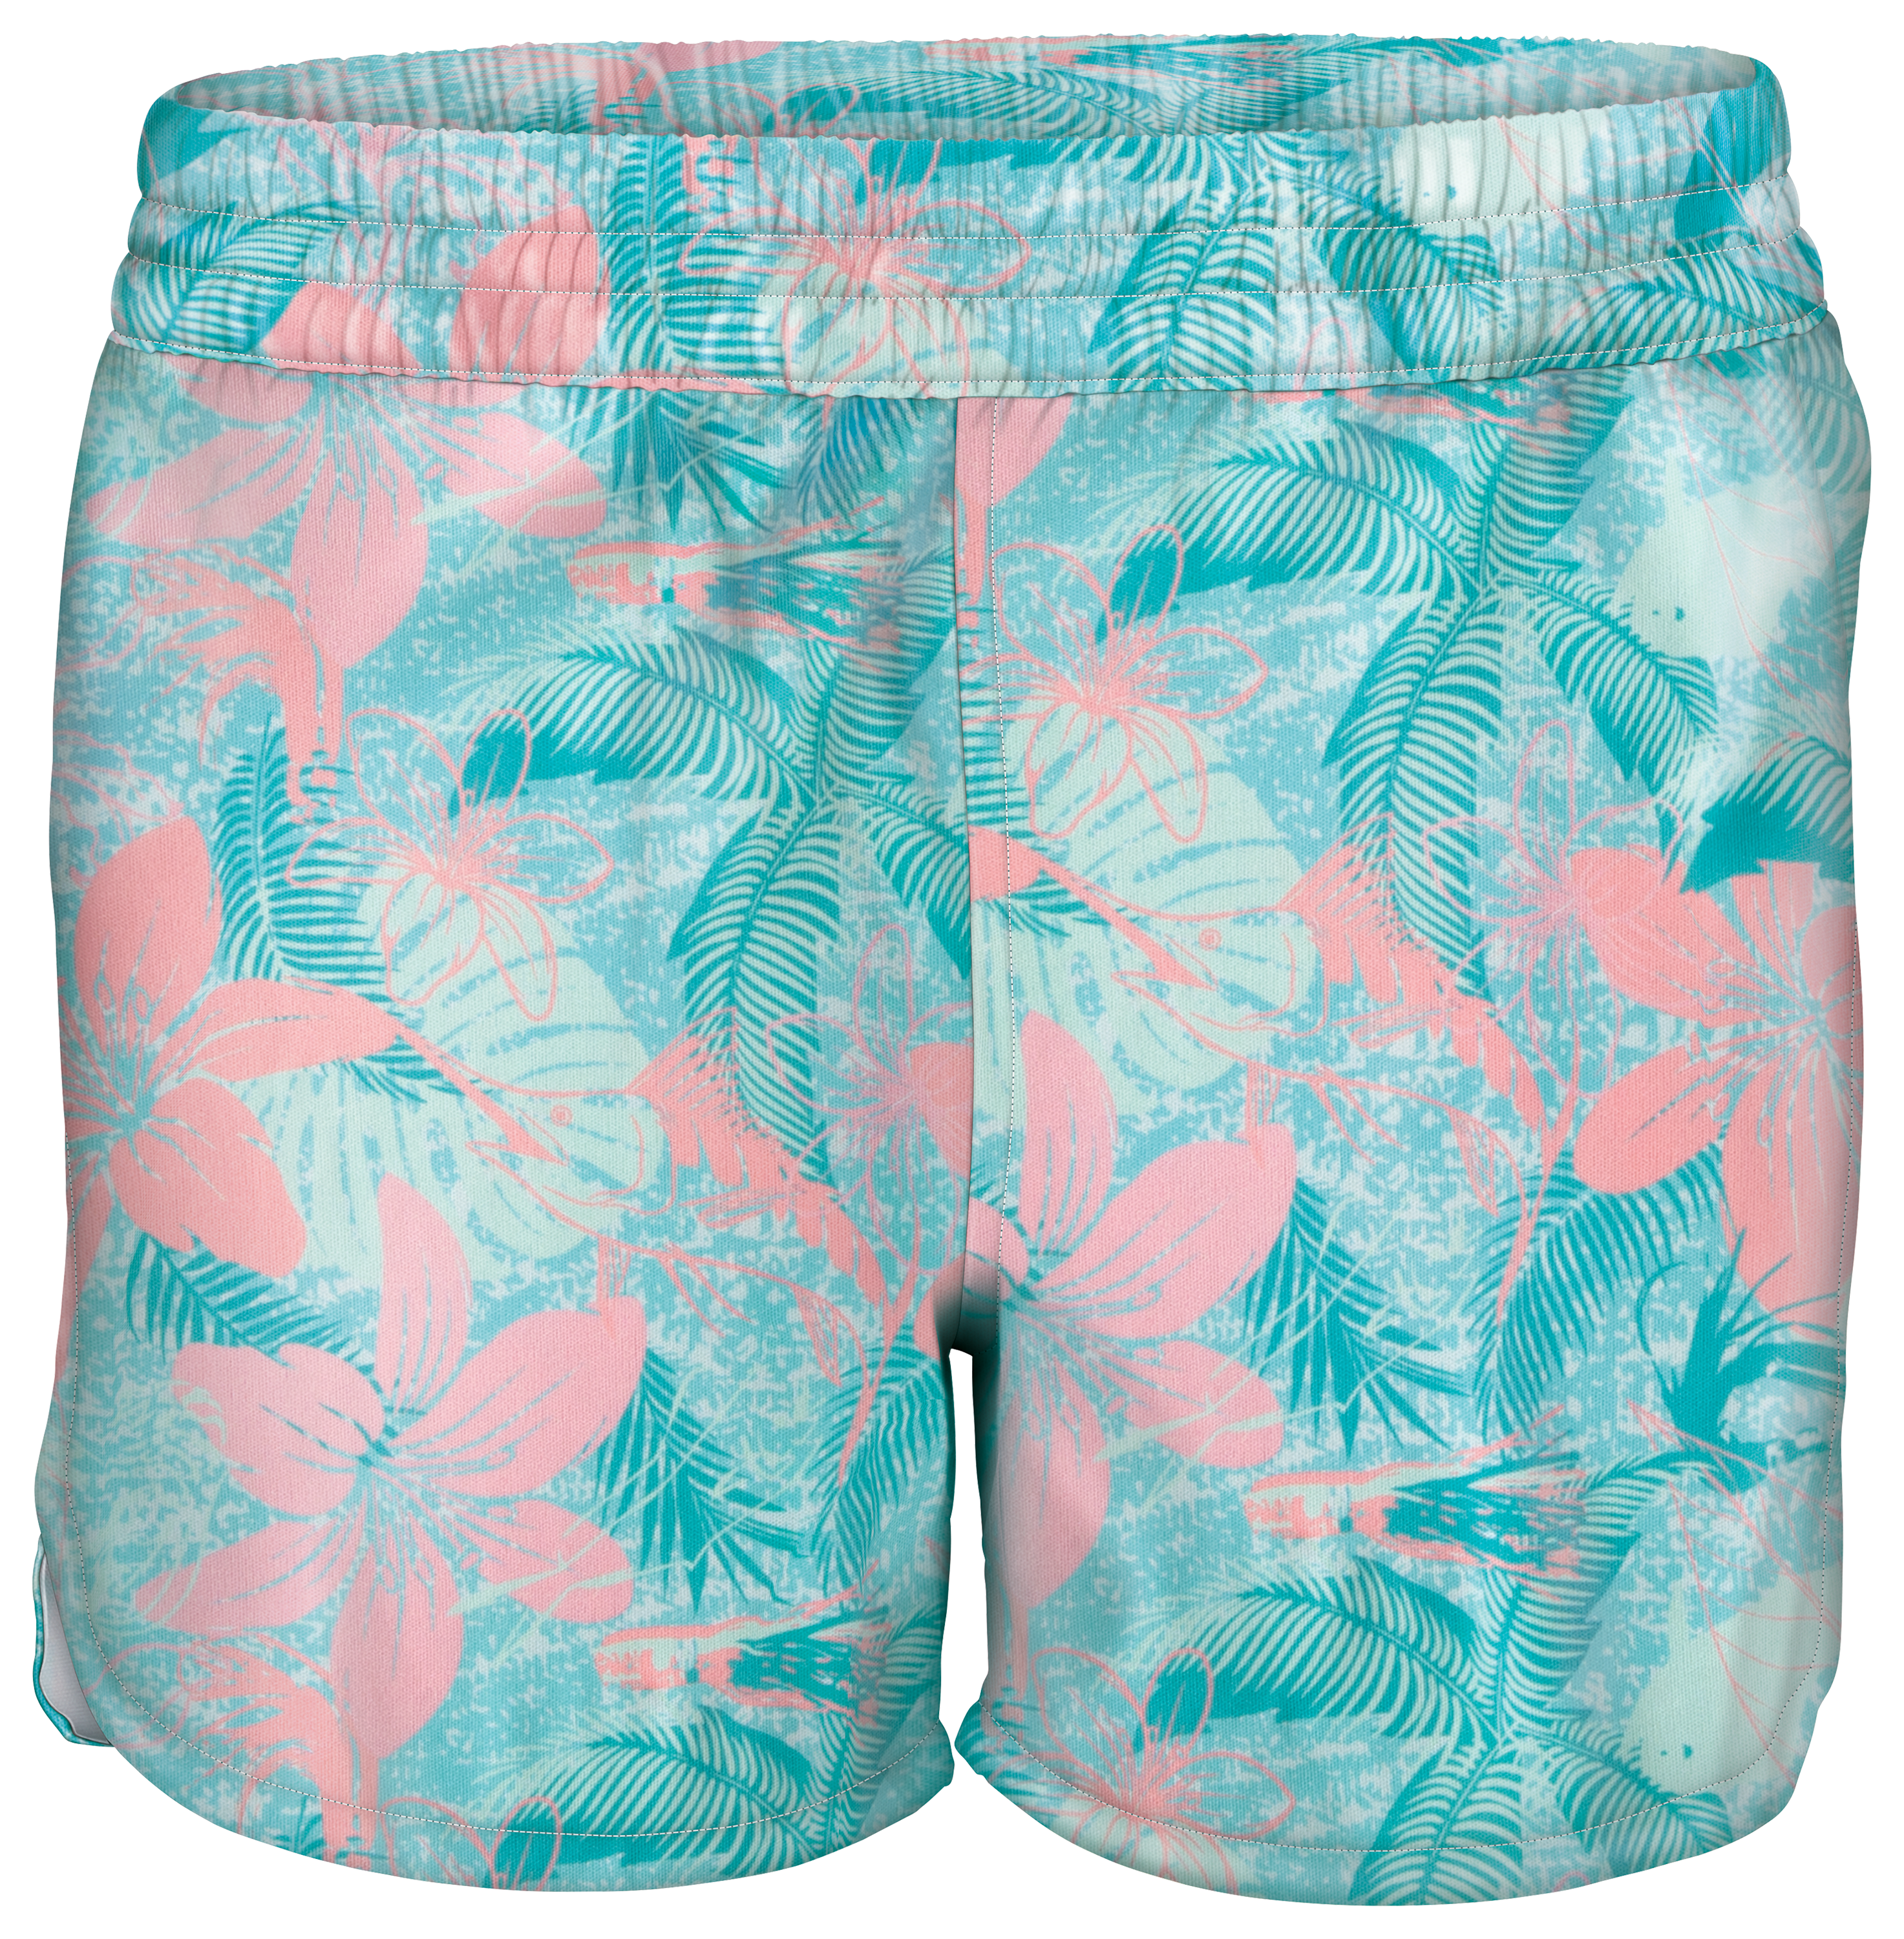 World Wide Sportsman Charter Pull-On Shorts for Girls - Tropical Fish - XL